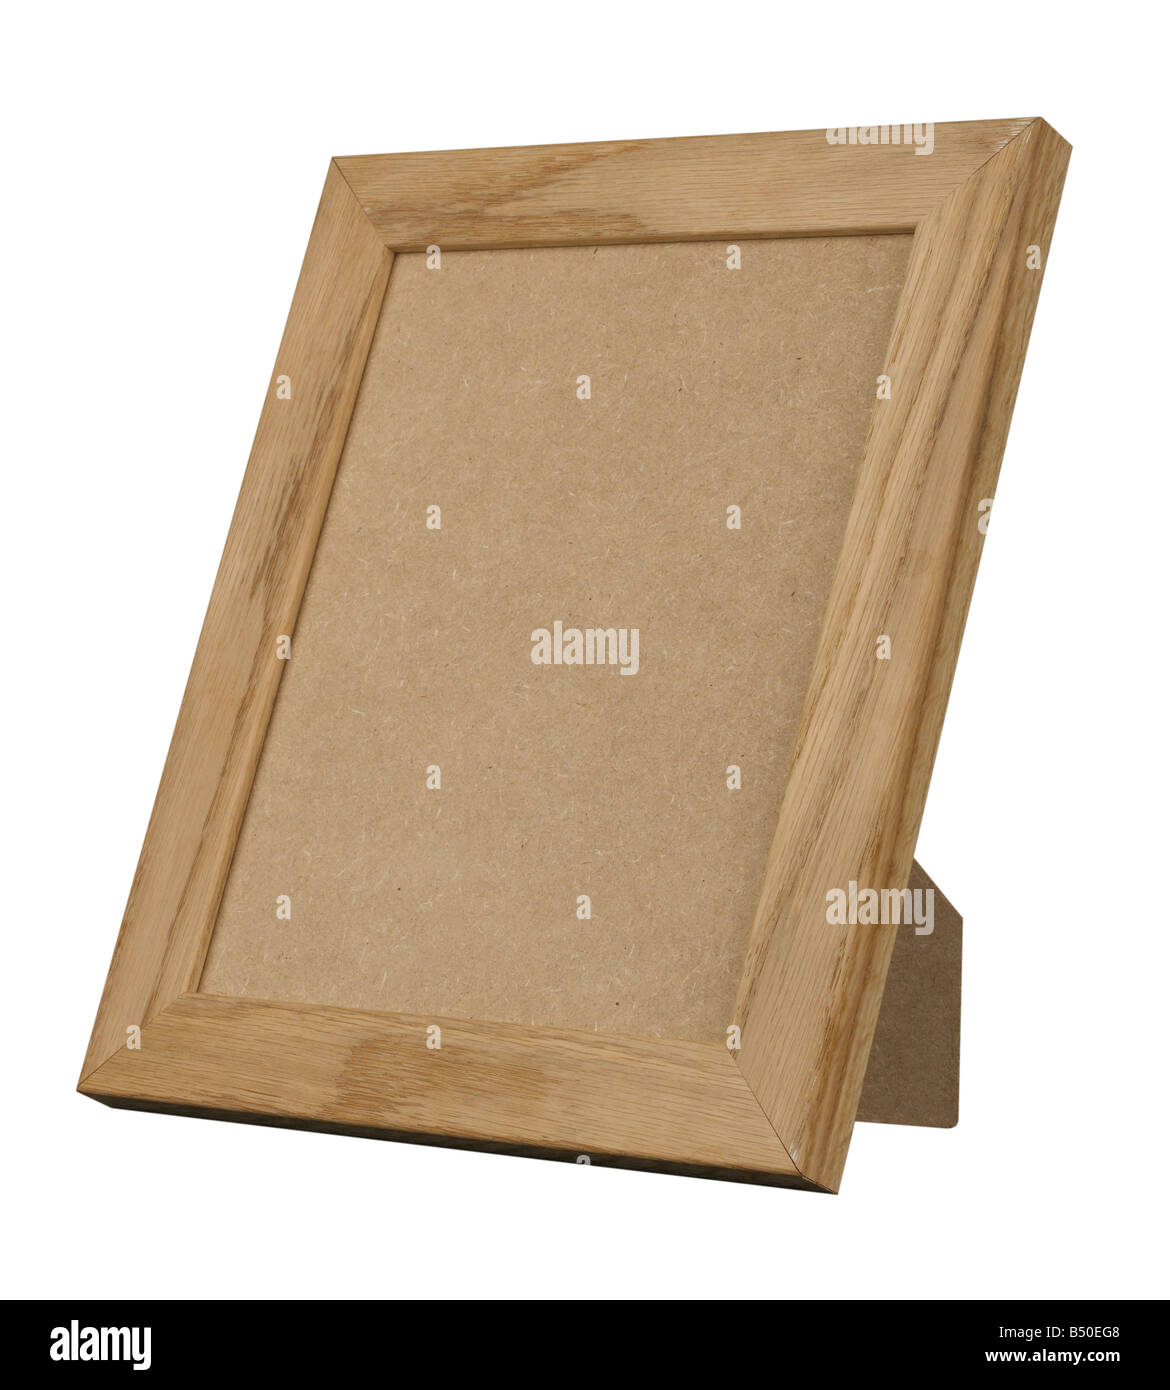 PALE WOOD PICTURE FRAME STANDING UPRIGHT Stock Photo